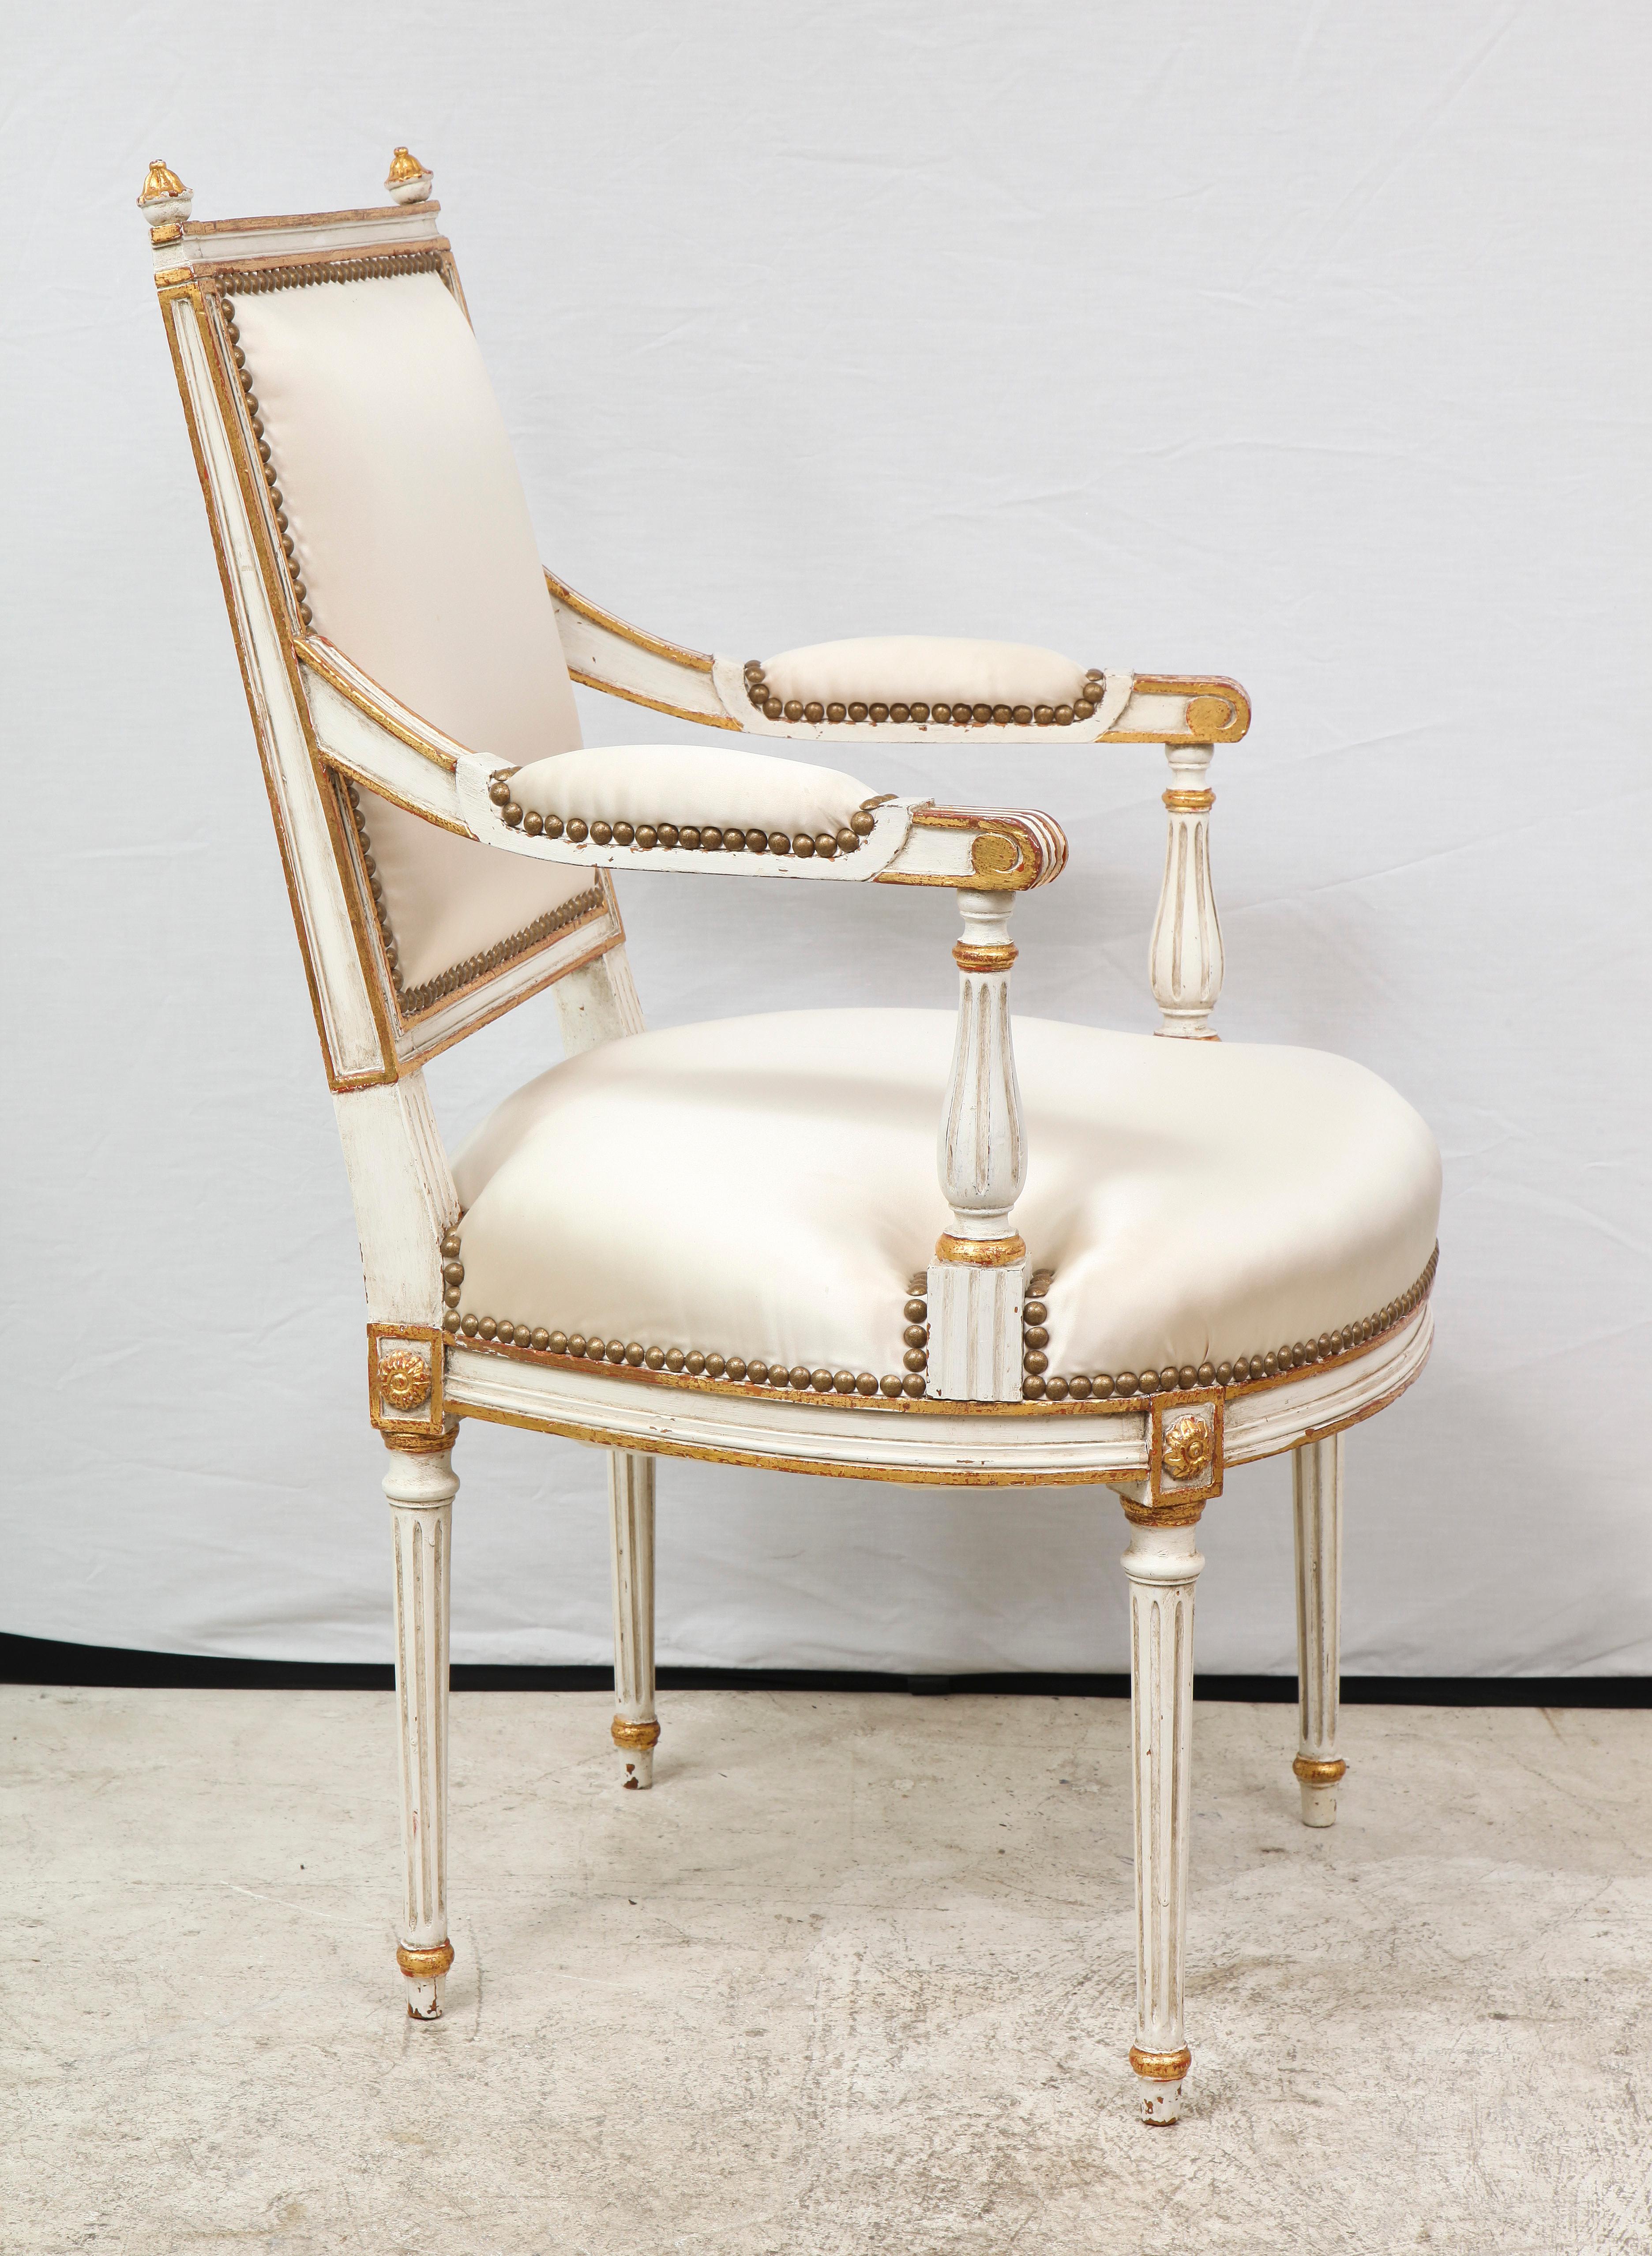 Pair of French Louis XVI style armchairs,
France, circa 1950s.